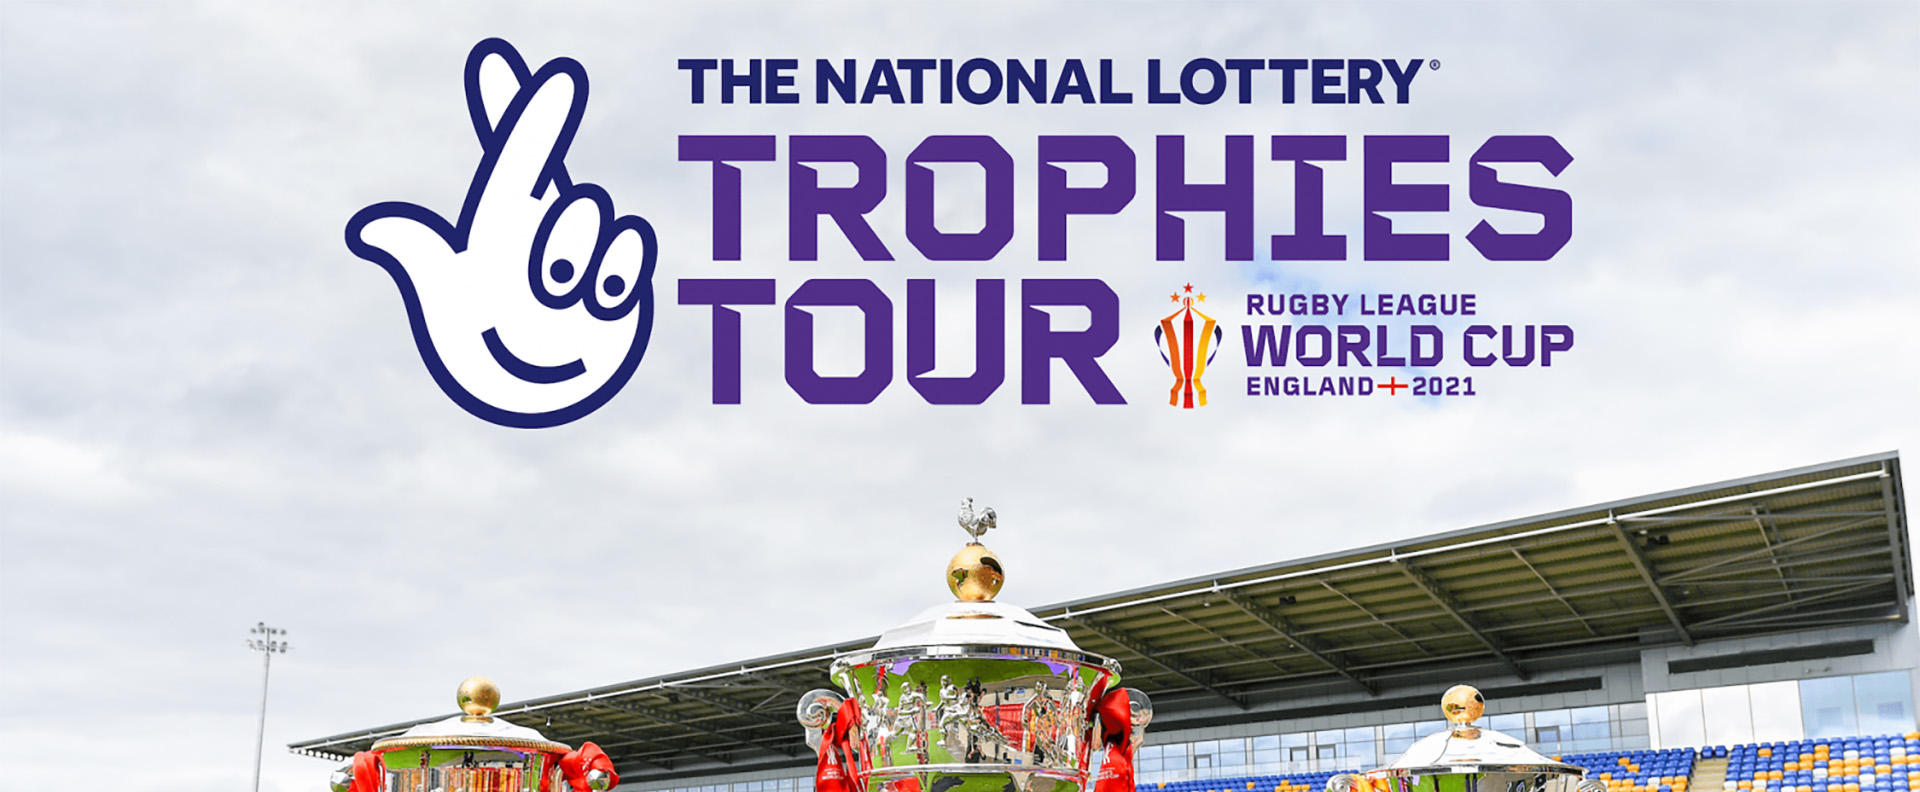 rugby league world cup trophies tour poster